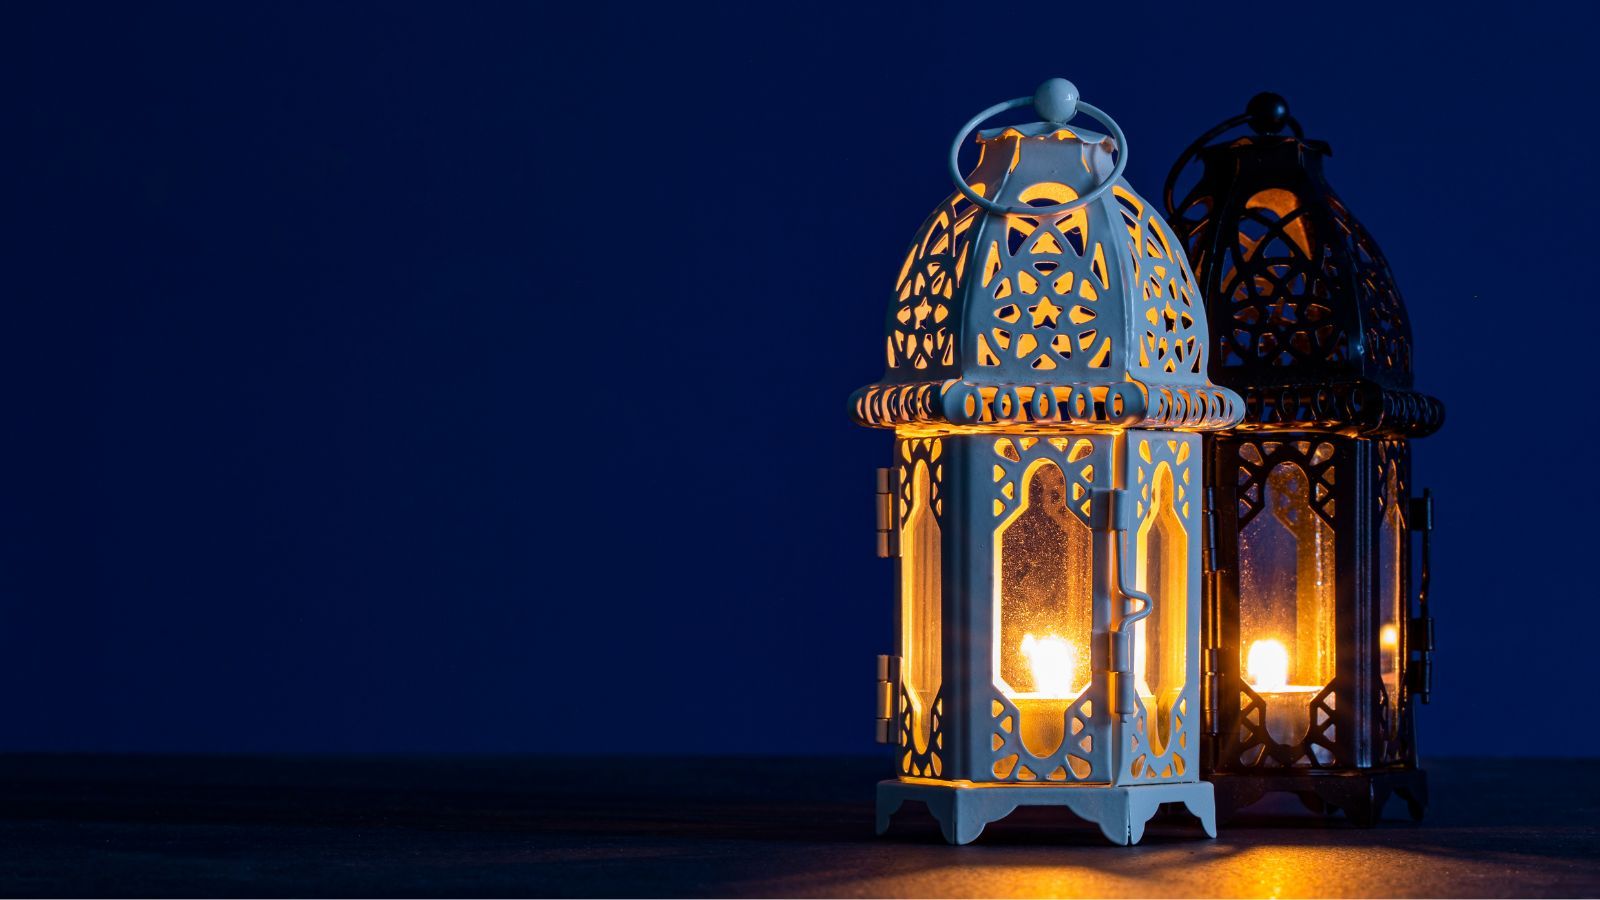 An ornately carved lantern glows with a lit candle, lighting up the darkness